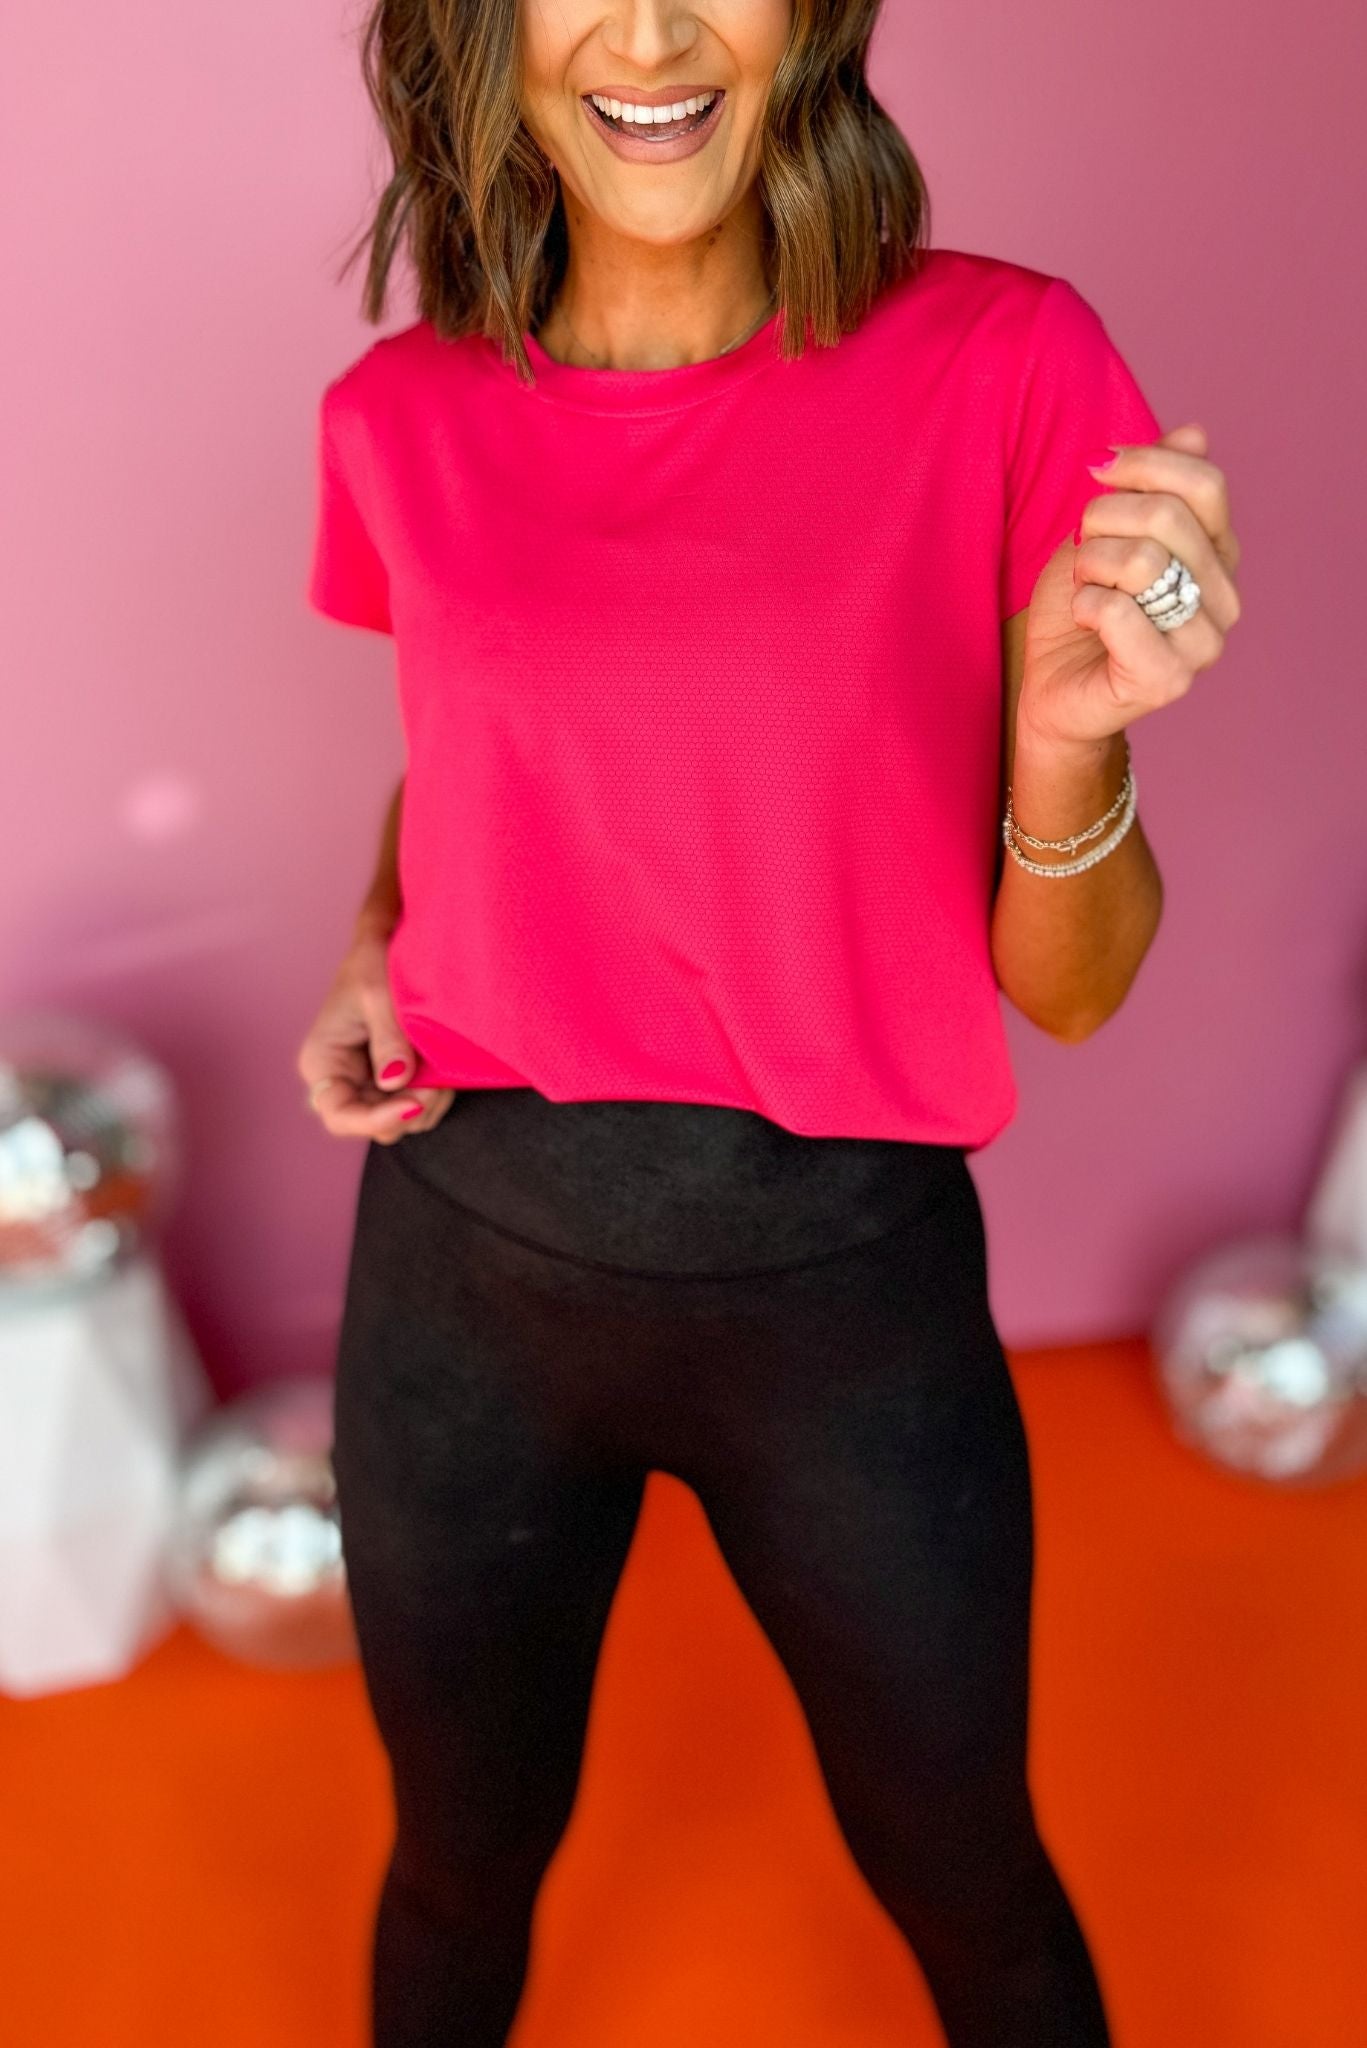 SSYS Hot Pink Honeycomb Short Sleeve Active Top,  ssys the label, athleisure, elevated athleisure, must have top, athletic top, bright top, athletic style, mom style, shop style your senses by mallory fitzsimmons, ssys by mallory fitzsimmons